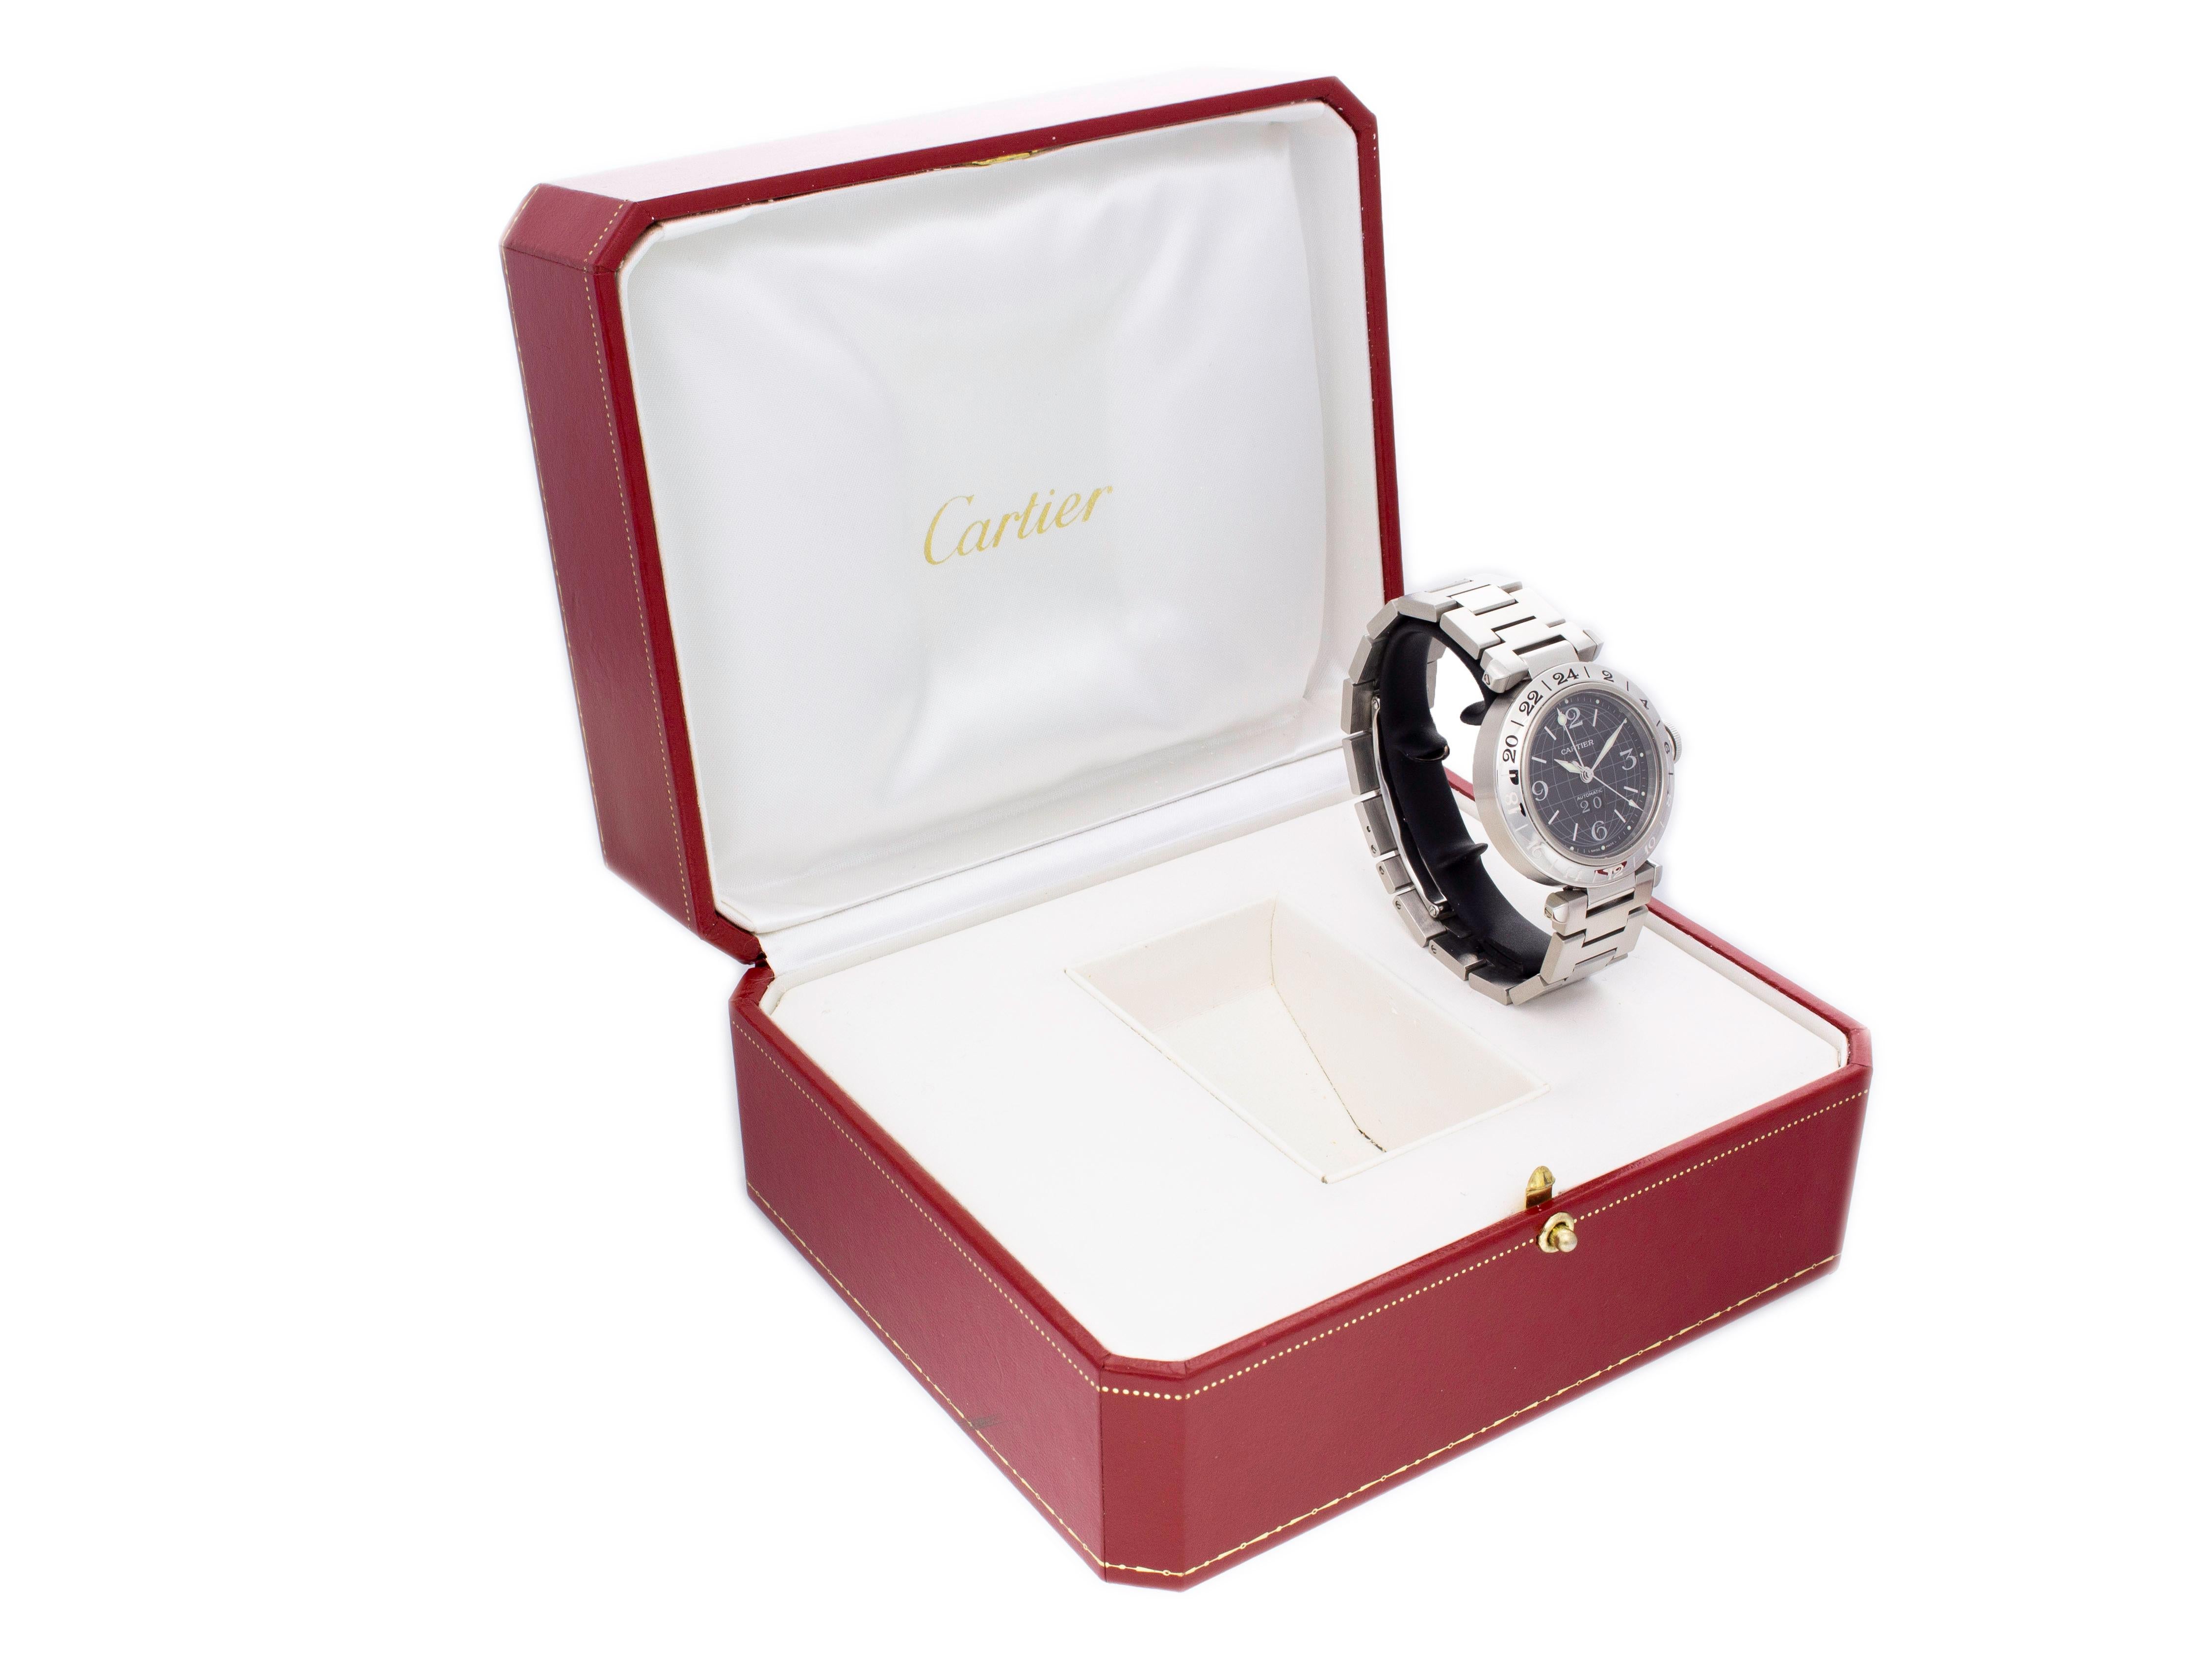 Stainless steel Cartier Pasha C GMT W31049M7 watch, water resistance to 30m, GMT, with date and stainless steel bracelet. Comes with Cartier box.


Brand	Cartier
Series	Pasha C GMT
Model	W31049M7
Gender	Unisex
Condition	Great Condition Pre-owned,